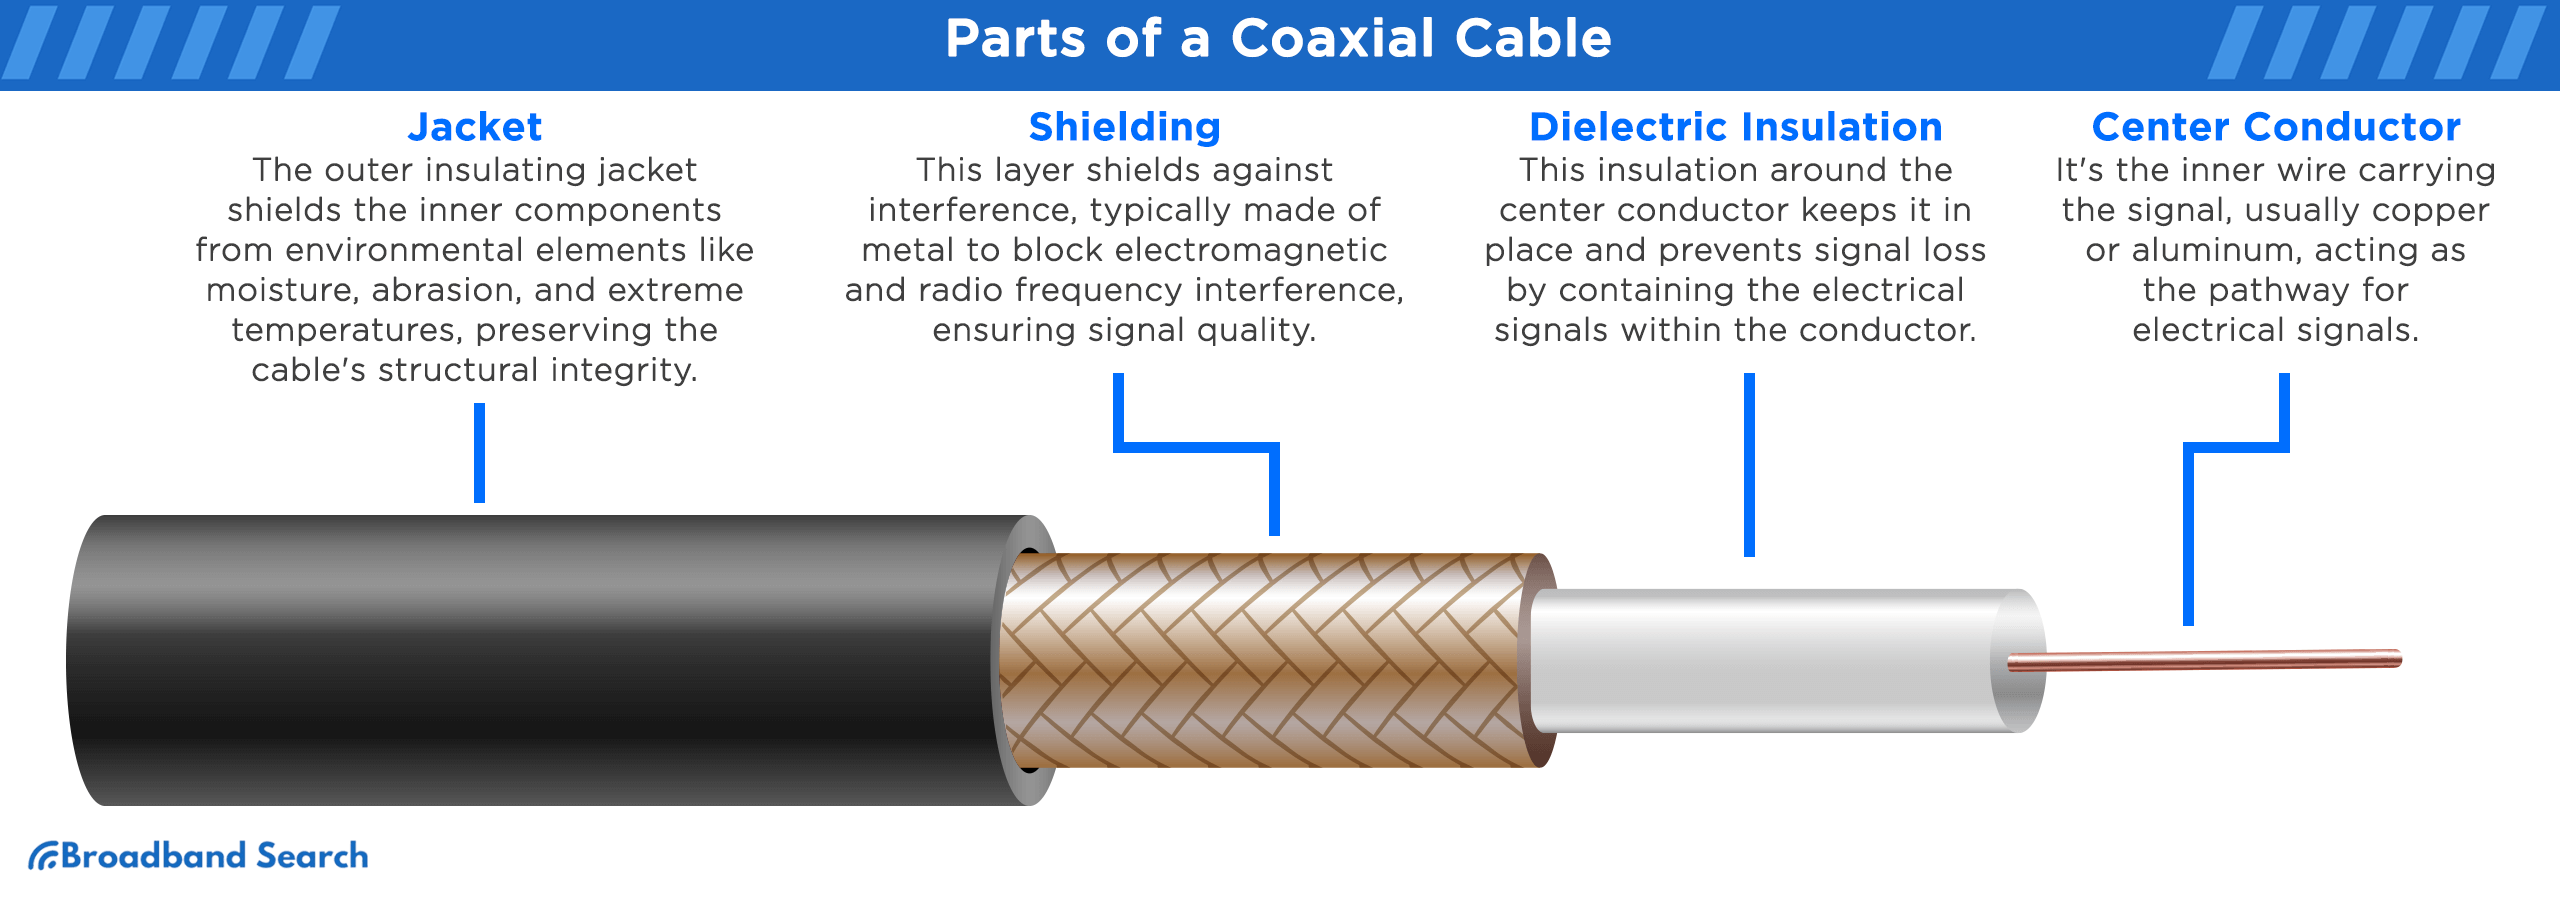 Parts of a coaxial cable